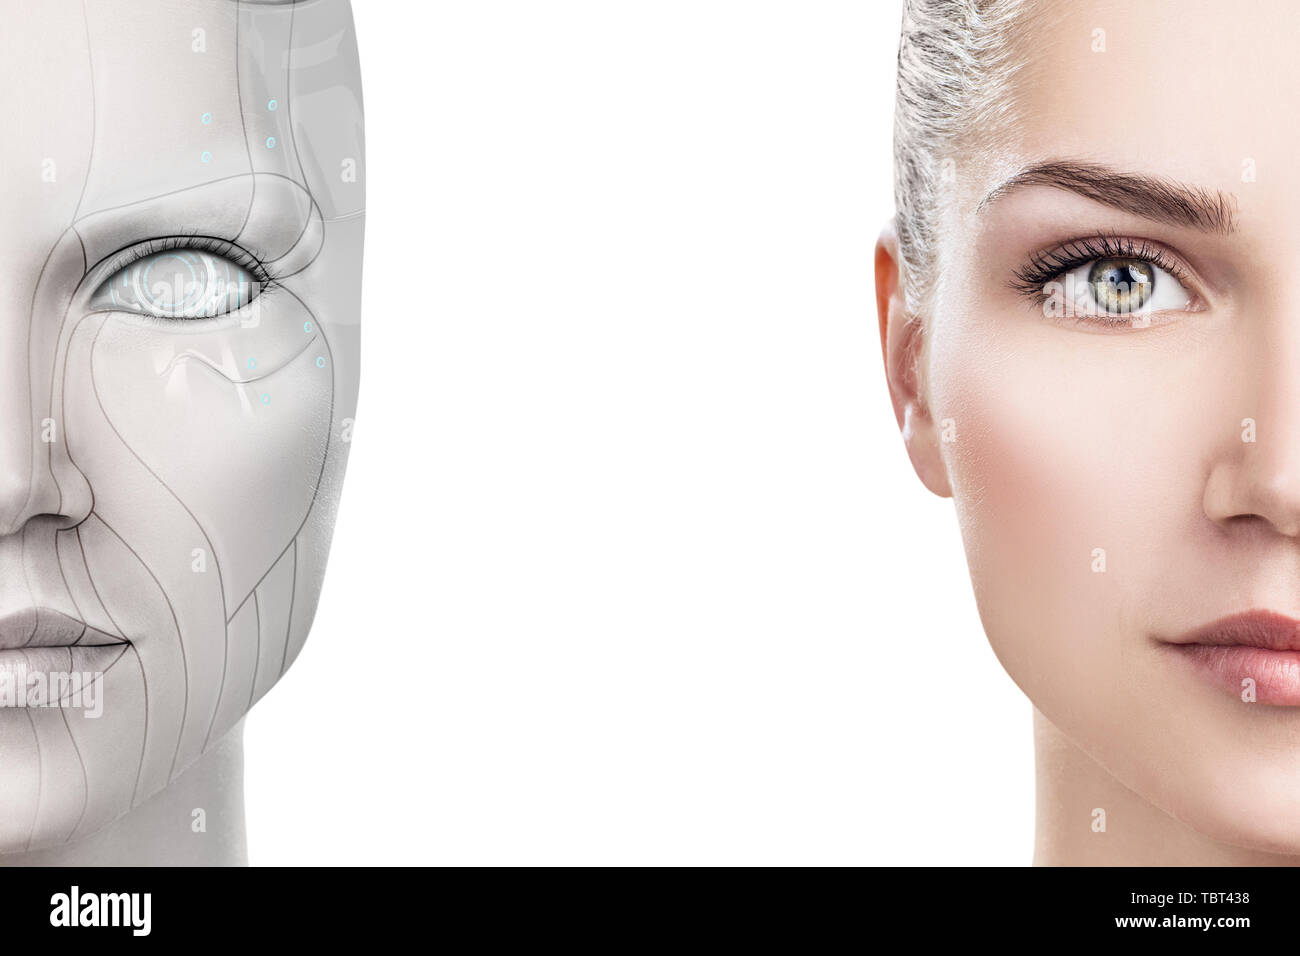 Cyborg woman with machine part of her face. Stock Photo